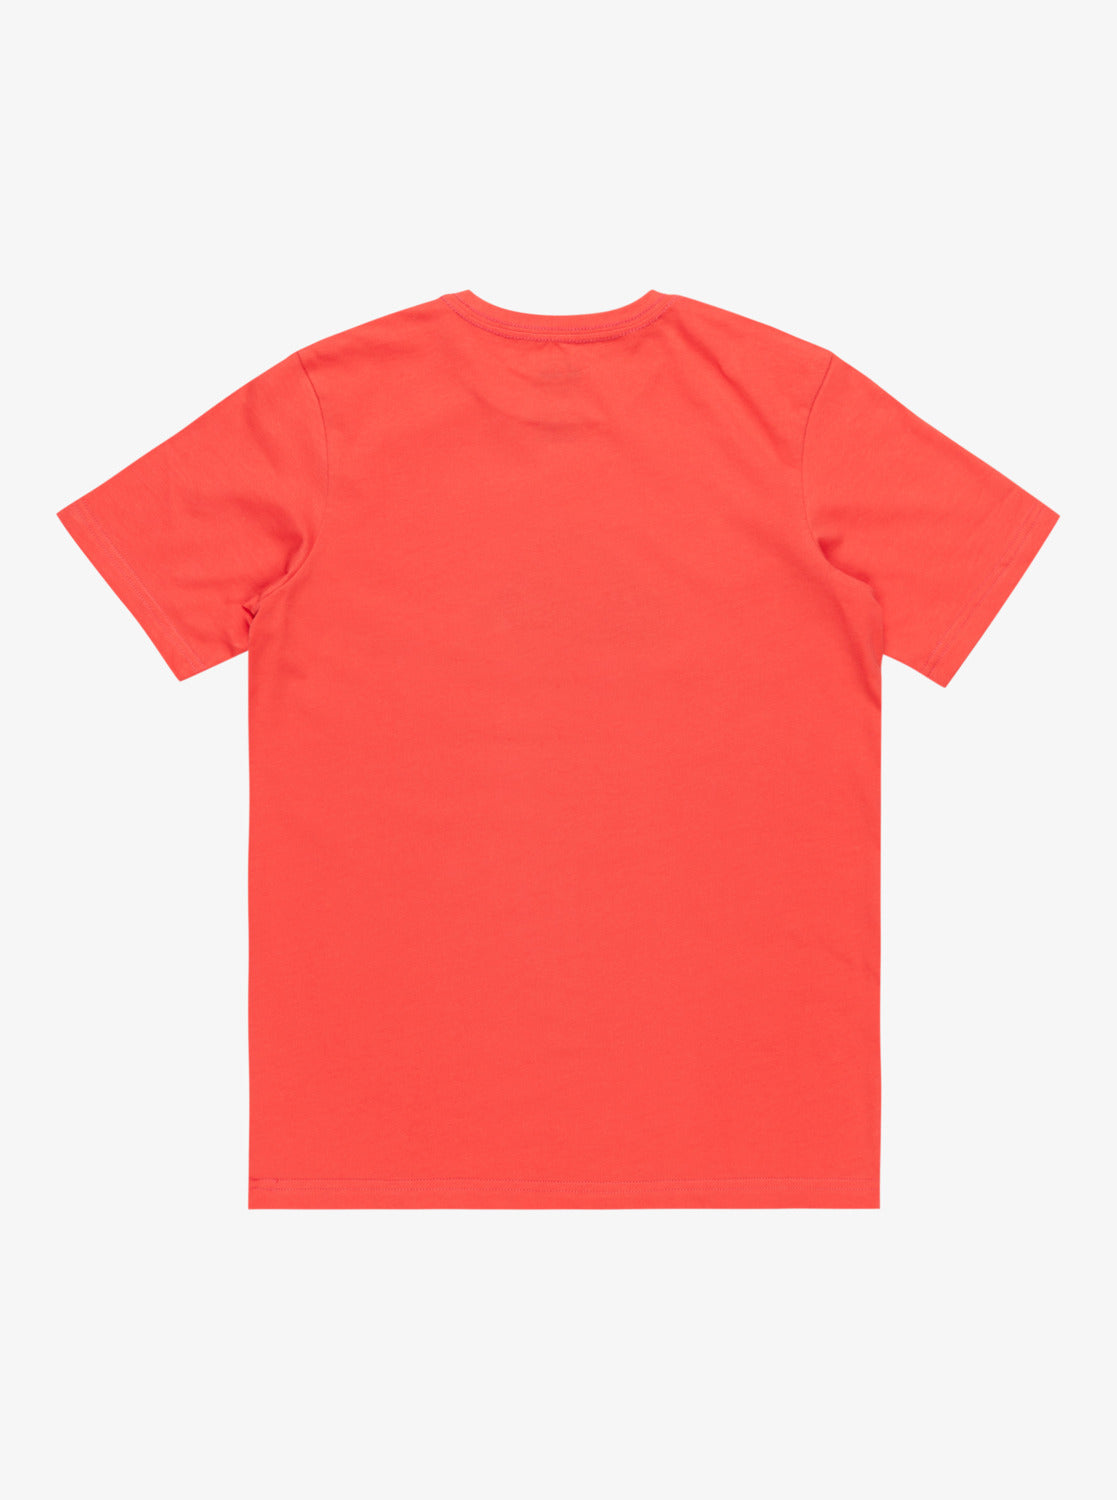 Quiksilver Comp Logo Boys T-Shirt in Cayenne